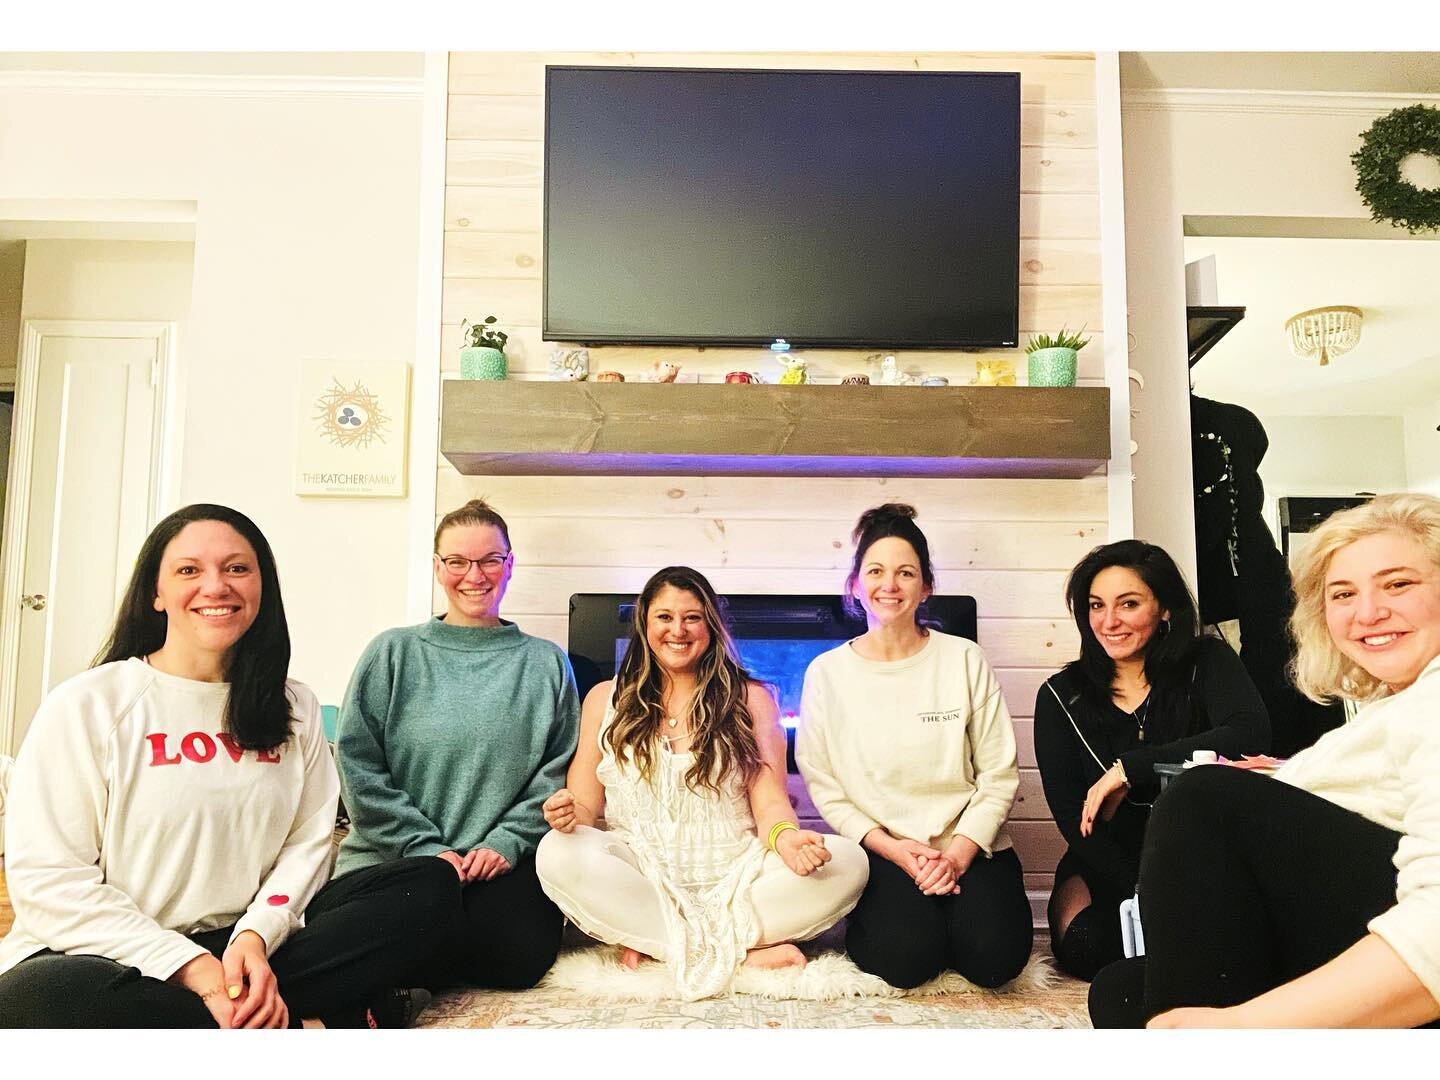 Tonight&rsquo;s private session @lokatch &lsquo;s cozy home.✨🏠💫

Thank you for being an amazing host!🤍
&bull;
&bull;
&bull;
#breathwork #breathworkhealingwithintention #breathingcircle #elevateyourself #raiseyourvibration #energetics #selfcareritu